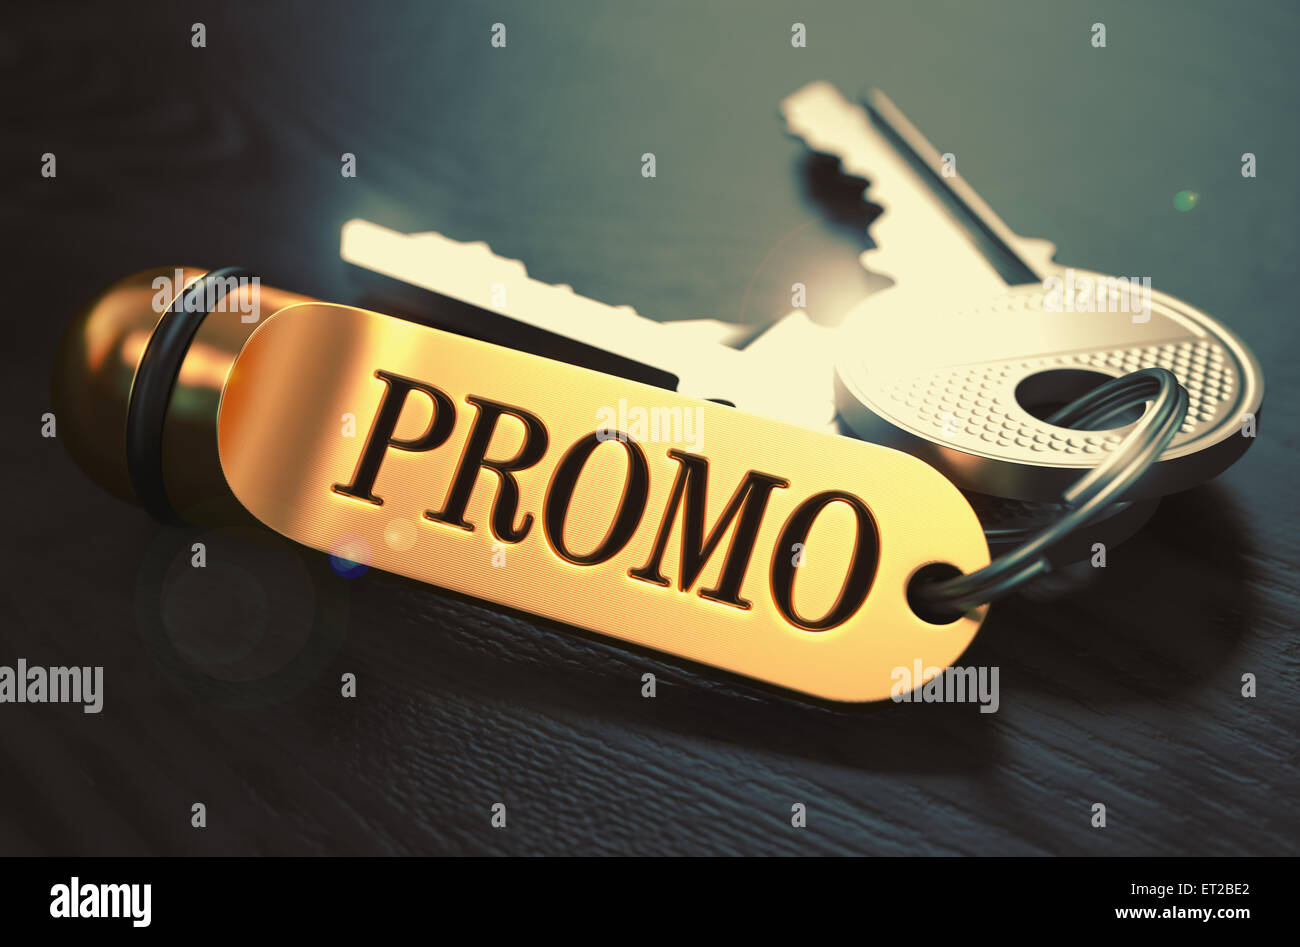 Promo Concept. Keys with Golden Keyring. Stock Photo